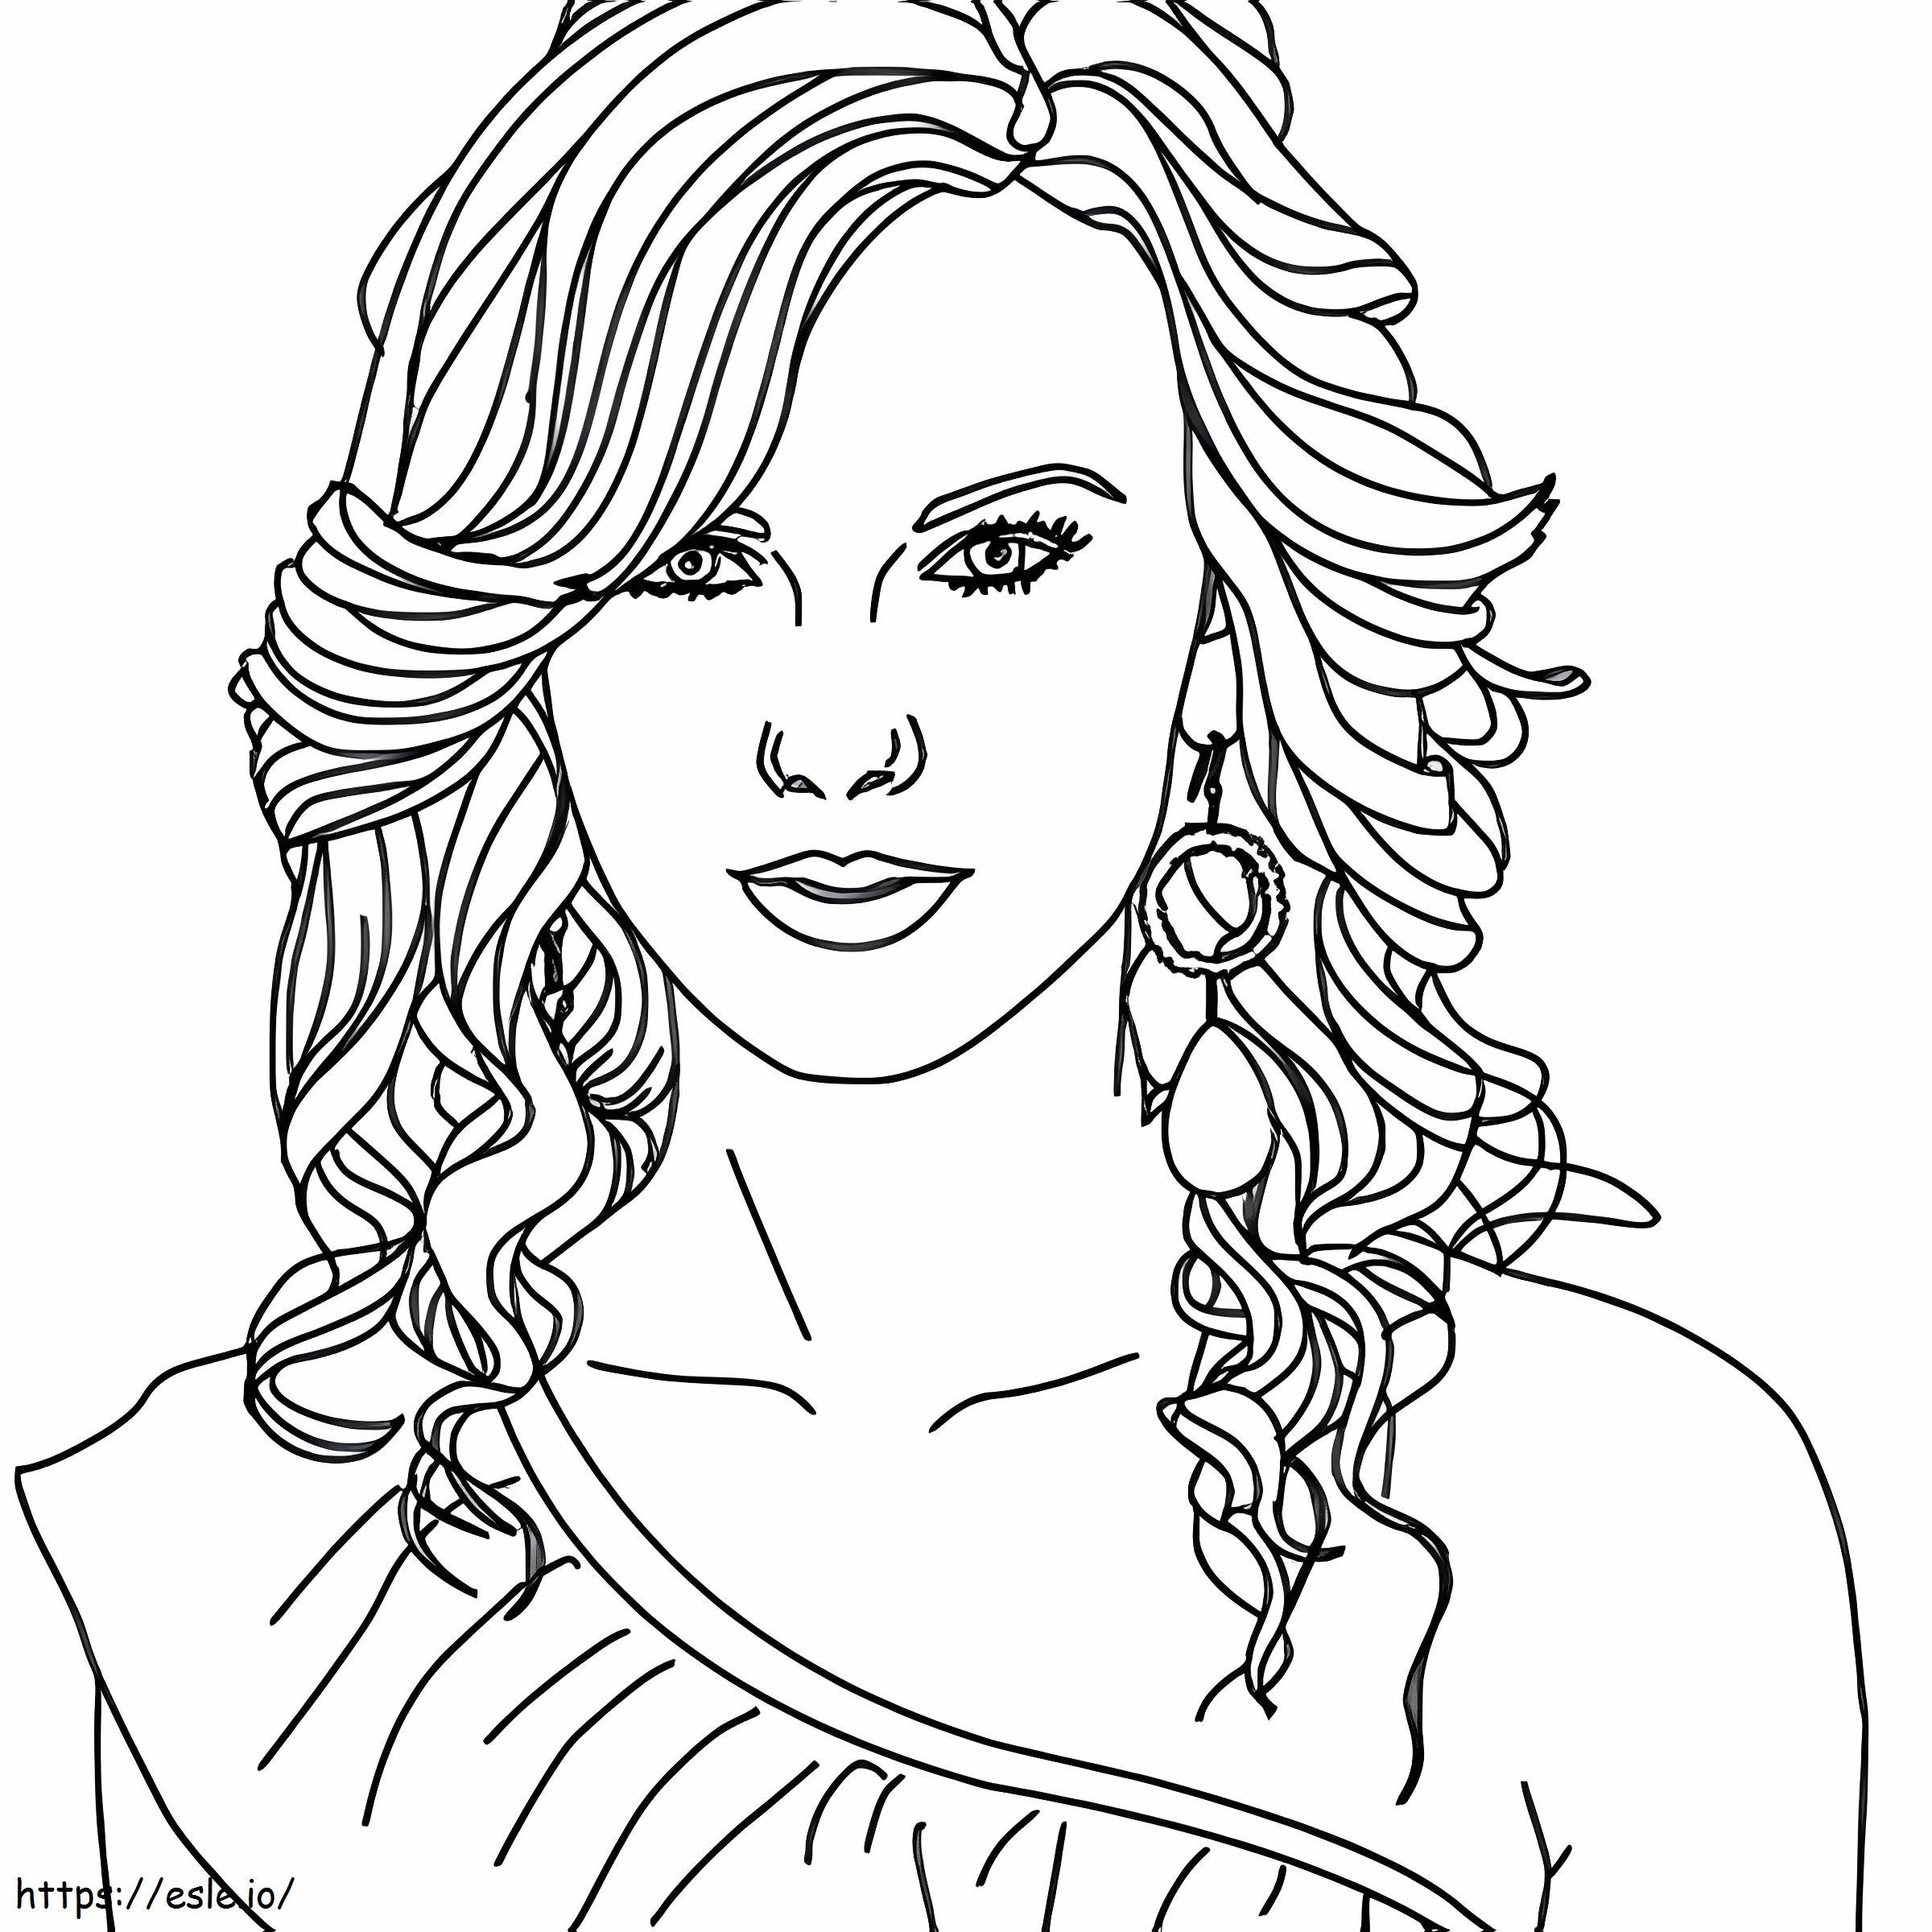 1541143686 Taylor Swift Pictures To Color Taylor Swift Download Jokingart Taylor Swift Disney Junior Activity Pages 600X600 1 coloring page